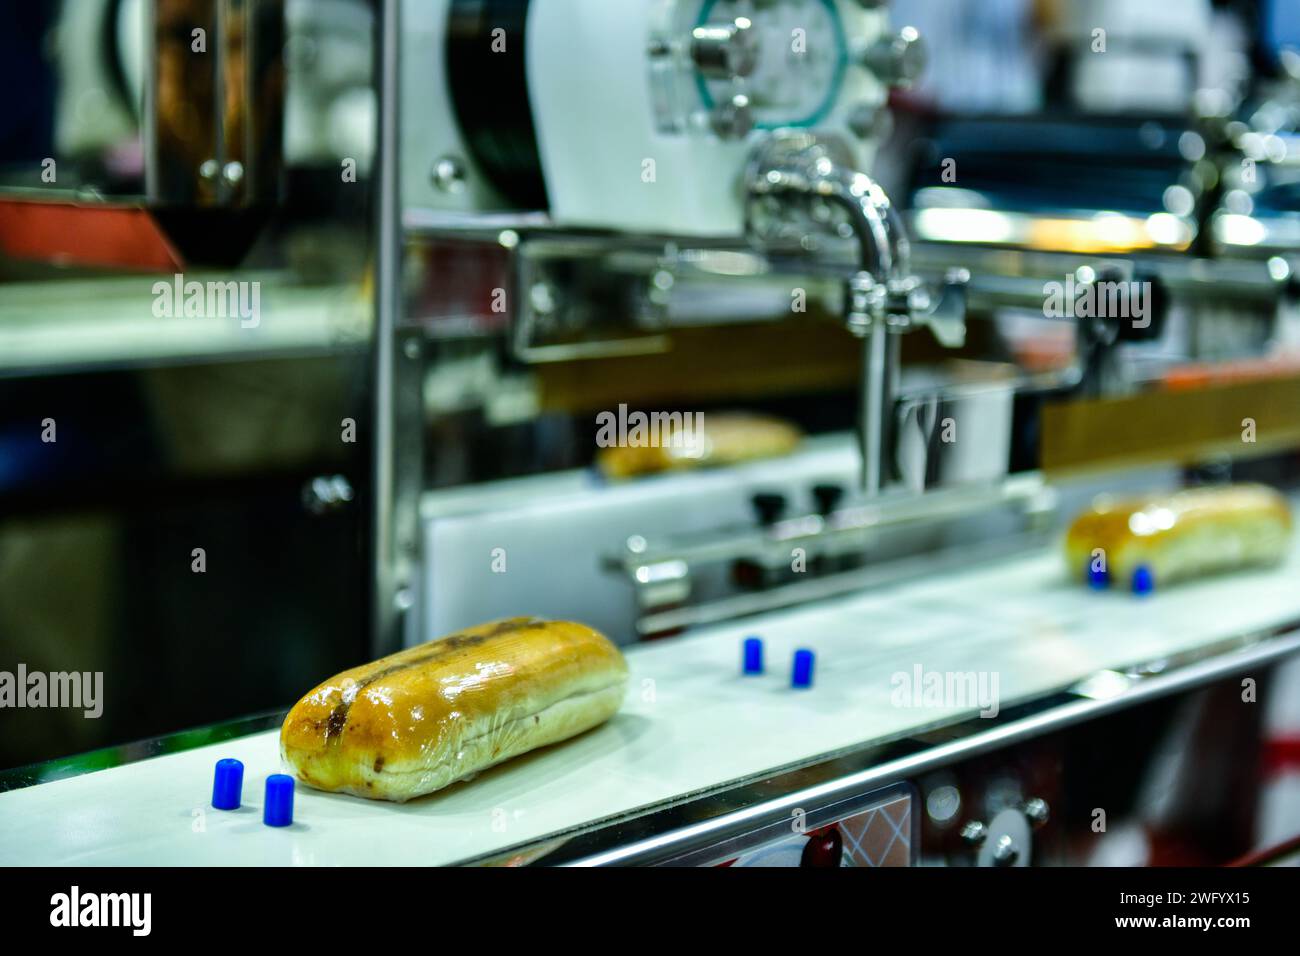 Automatic hamburger buns production line on conveyor belt equipment machinery in factory, industrial food production. Stock Photo